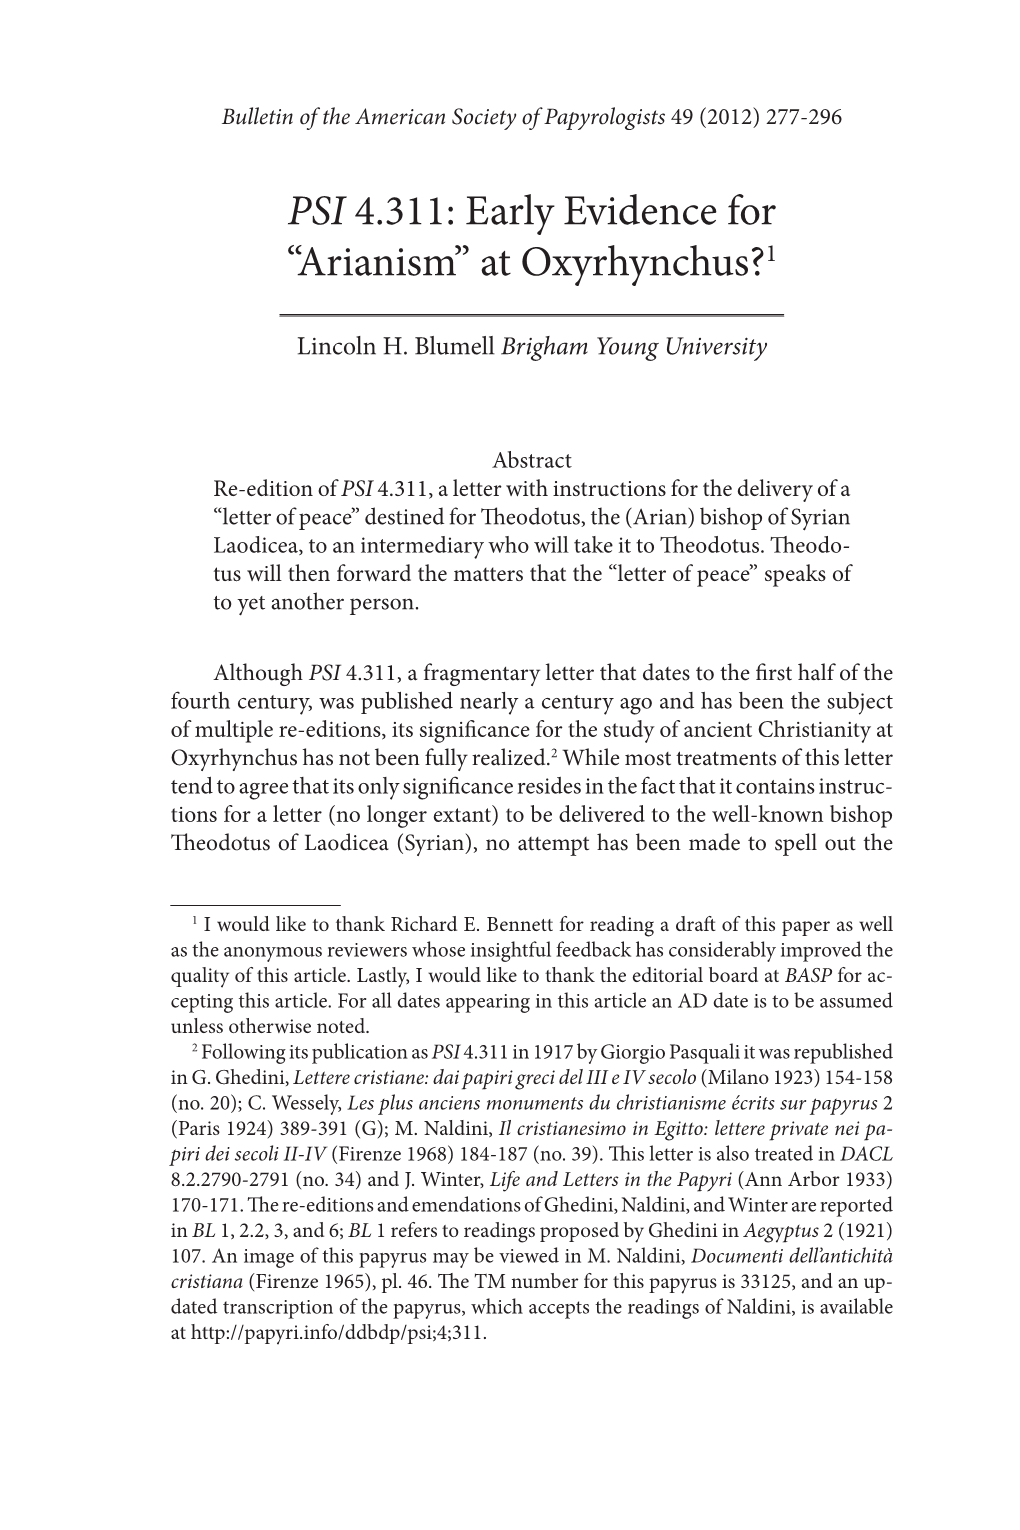 PSI 4.311: Early Evidence for “Arianism” at Oxyrhynchus?1